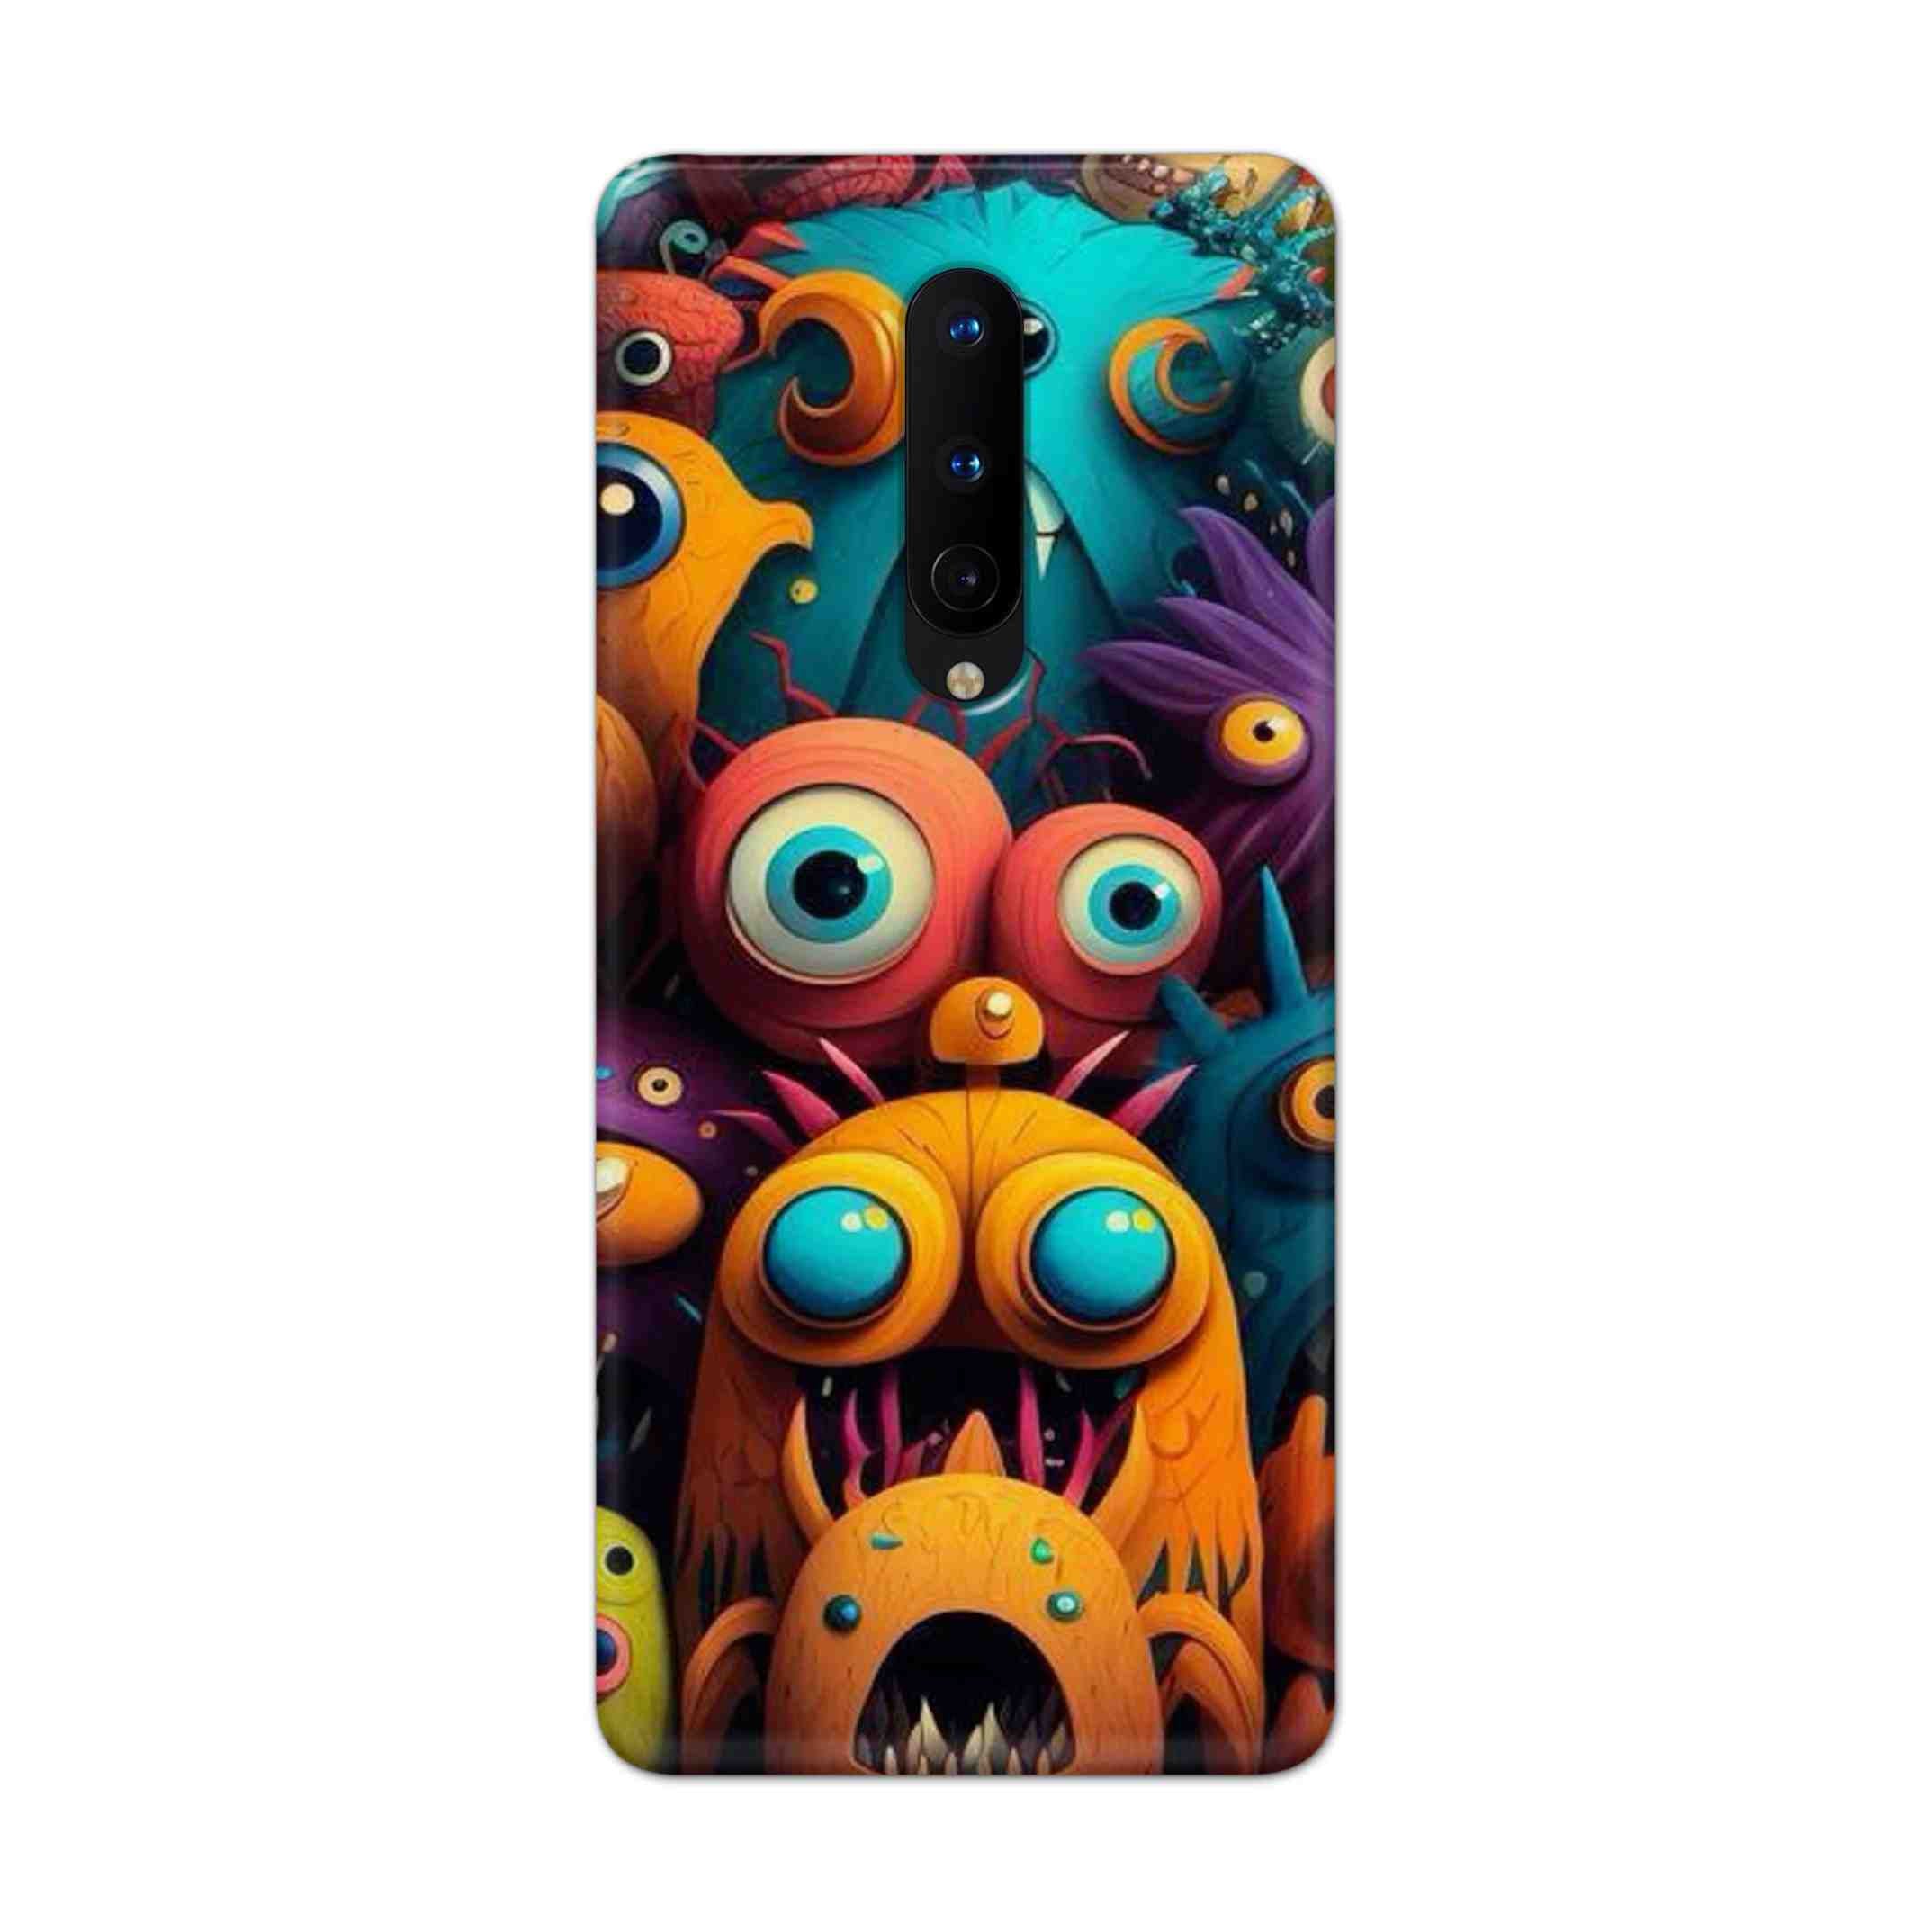 Buy Zombie Hard Back Mobile Phone Case Cover For OnePlus 8 Online